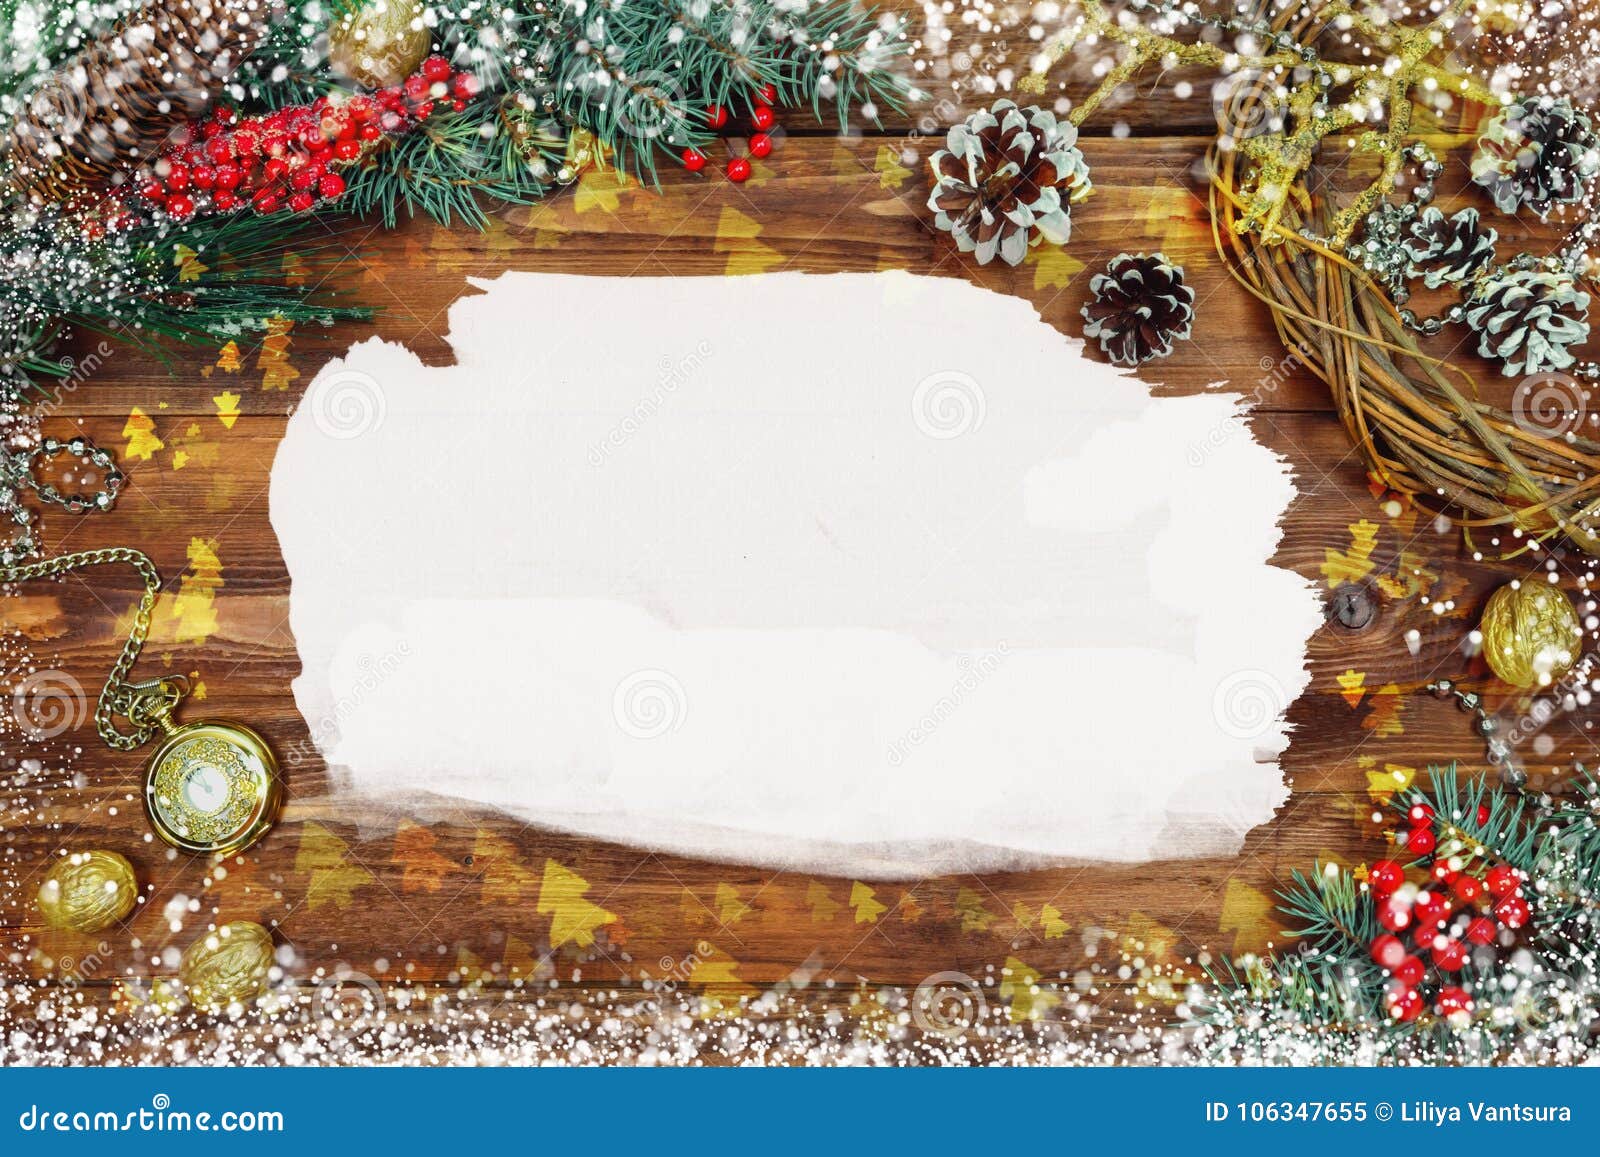 Christmas Wooden Background with Snow Branch. Top View with Copy Space ...